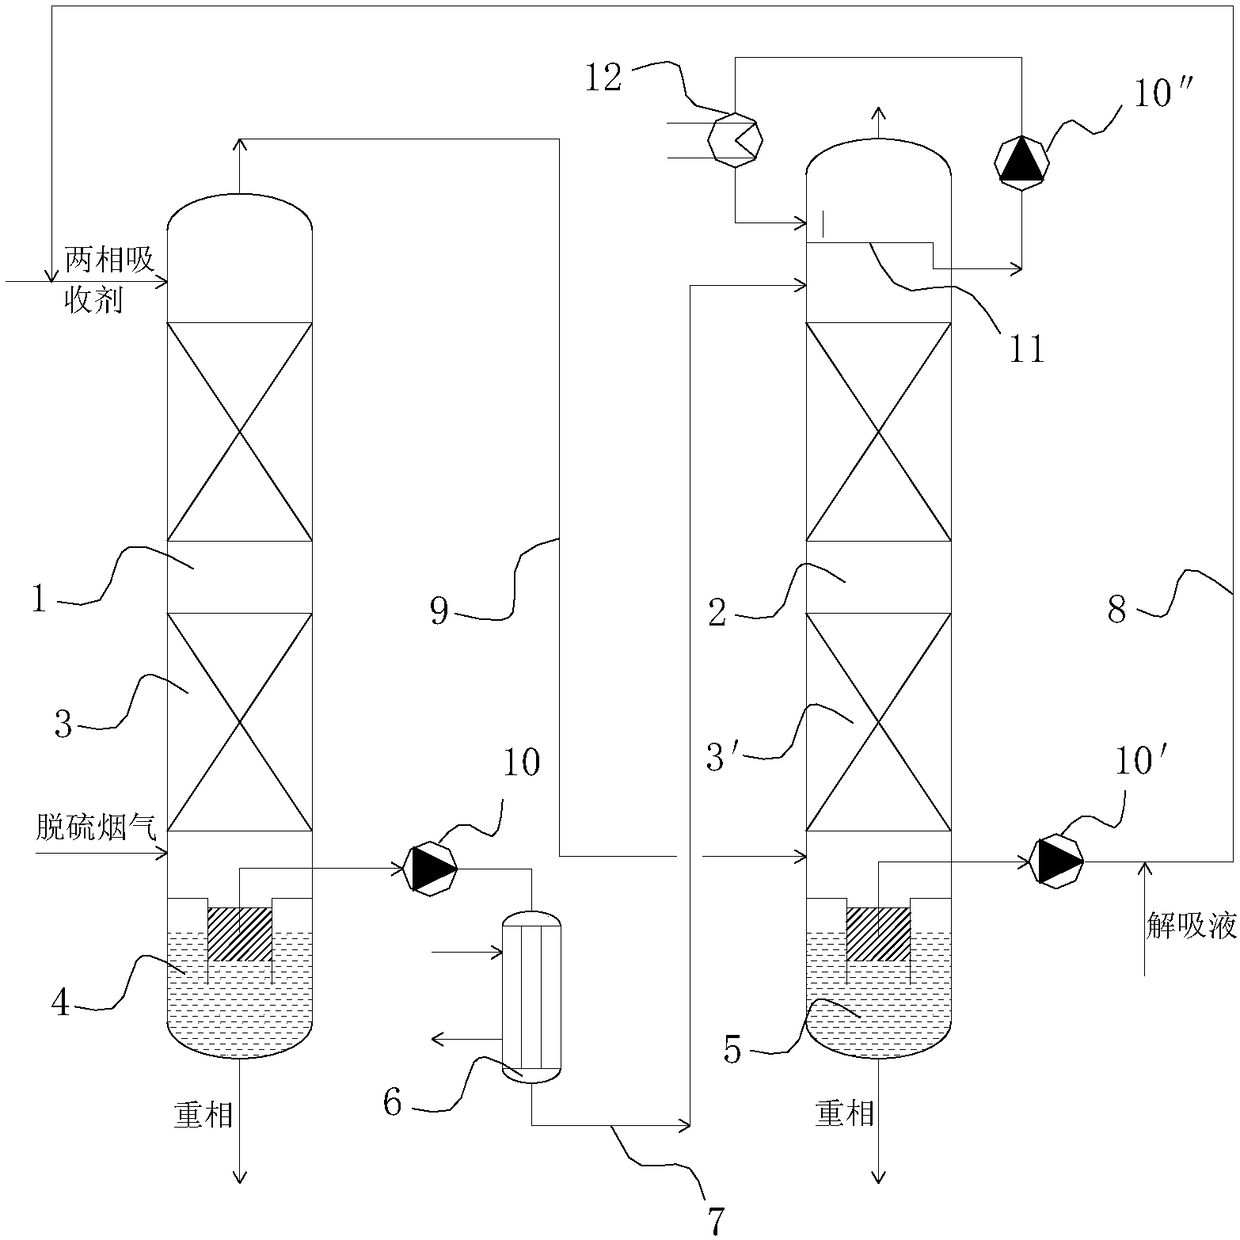 Two-phase absorbent based flue gas carbon dioxide absorbing device